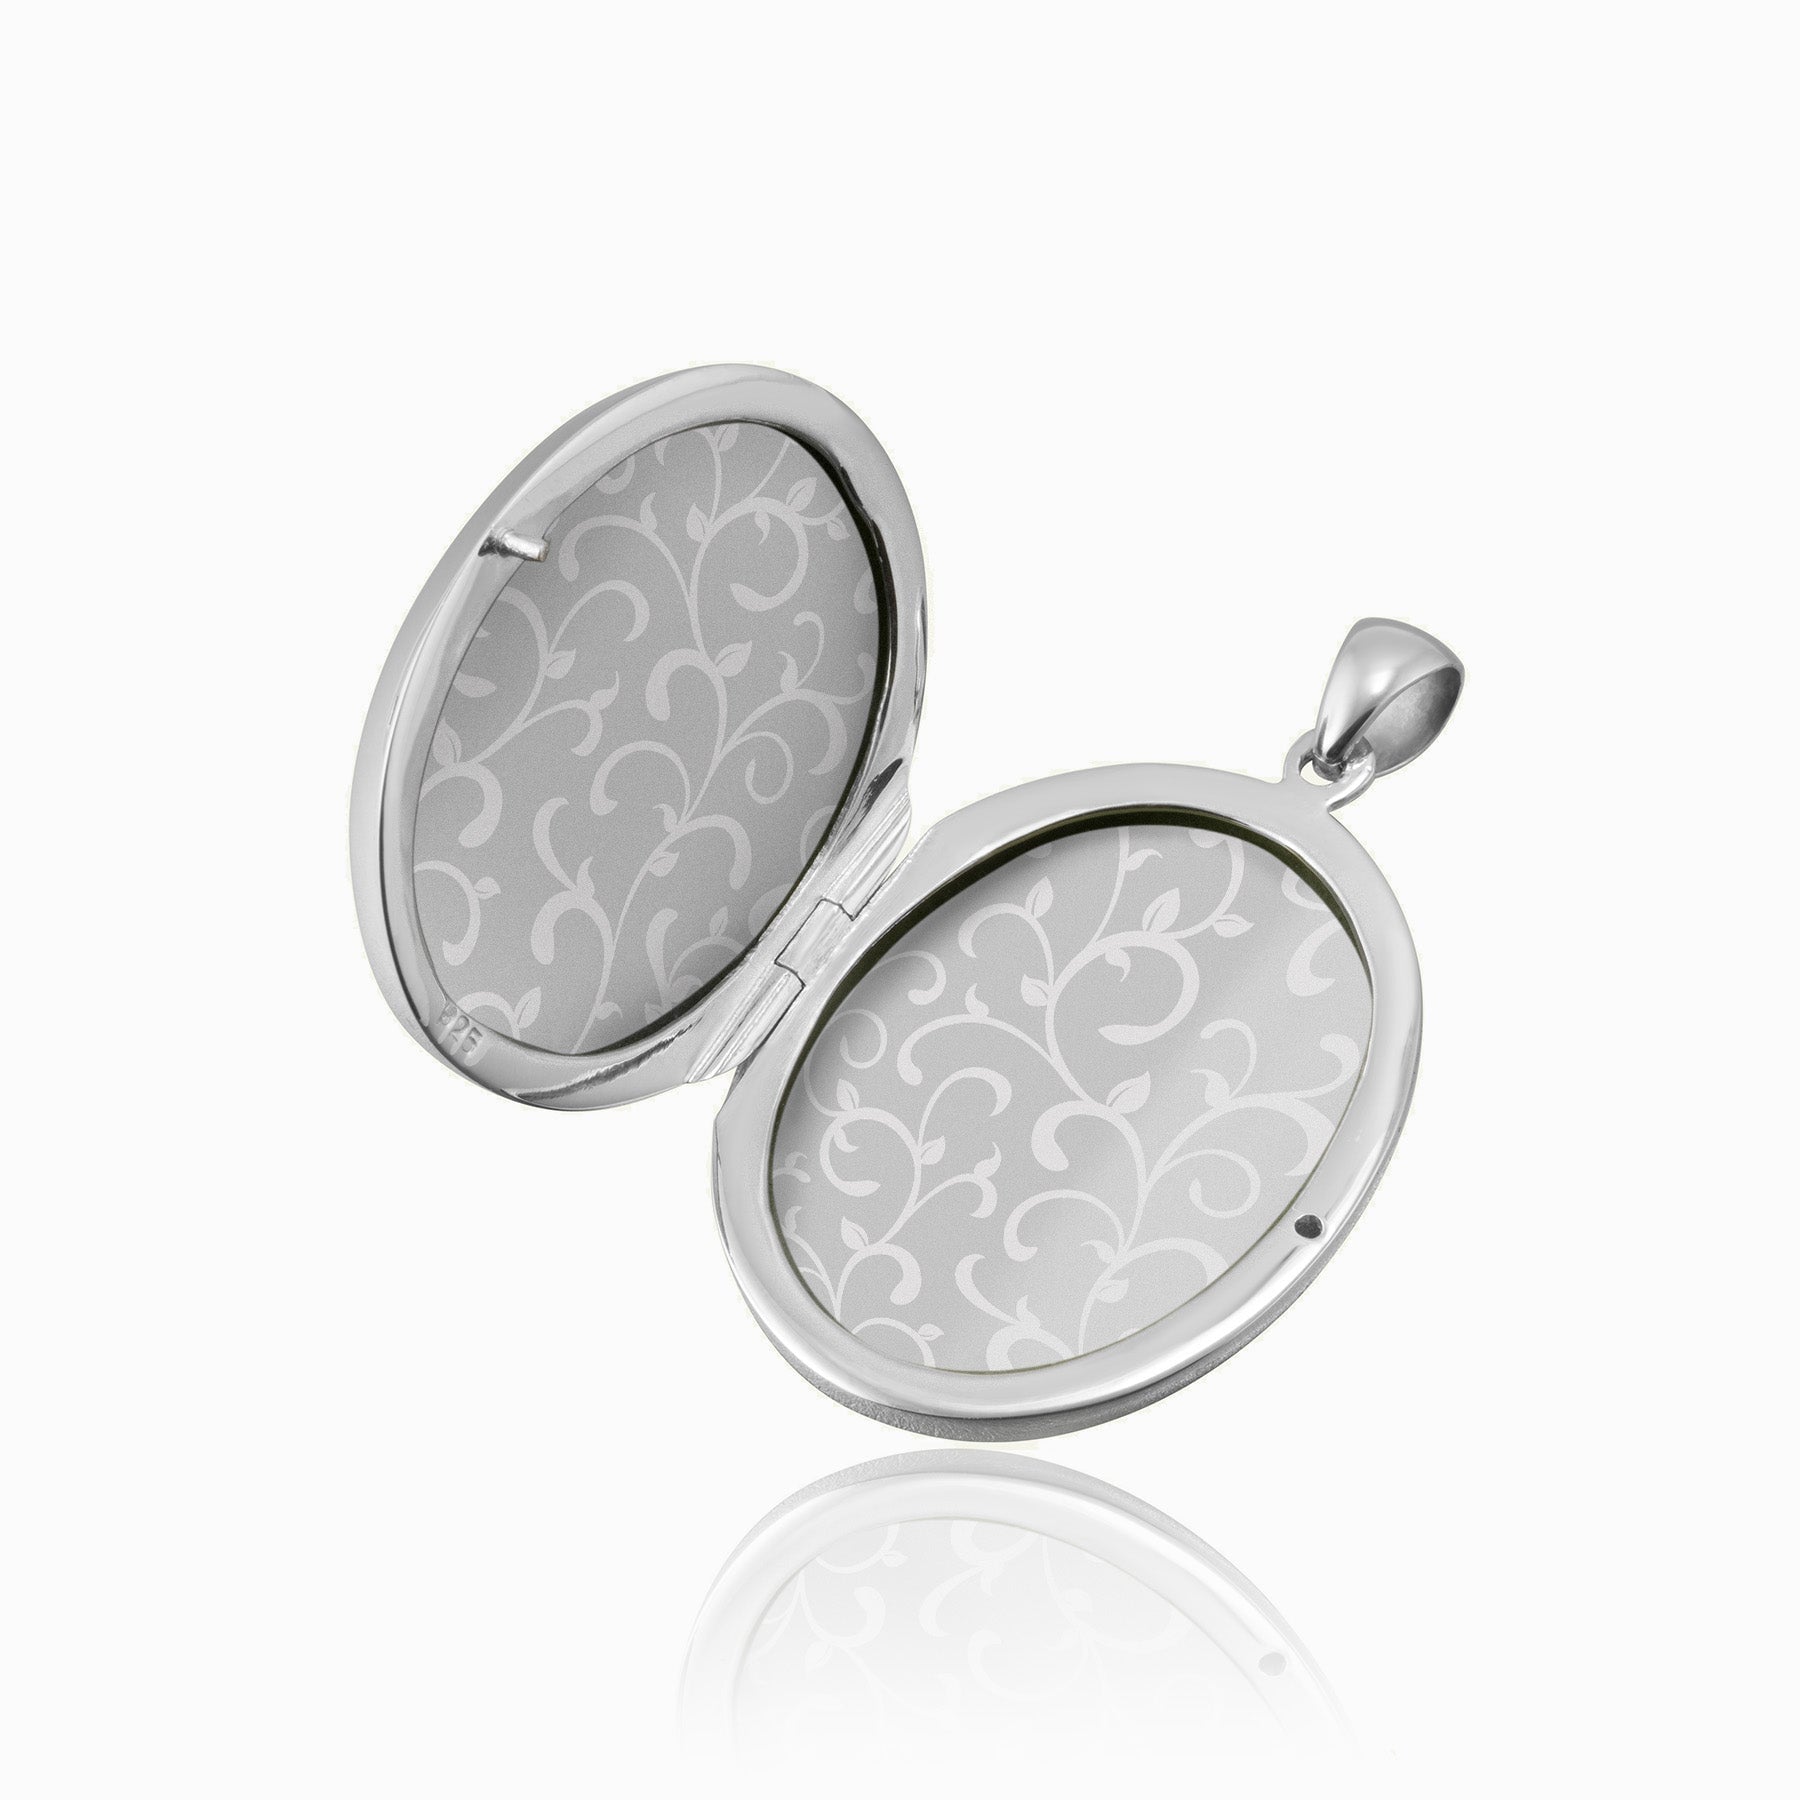 Product title: Floral Engraved Oval Locket, product type: Locket